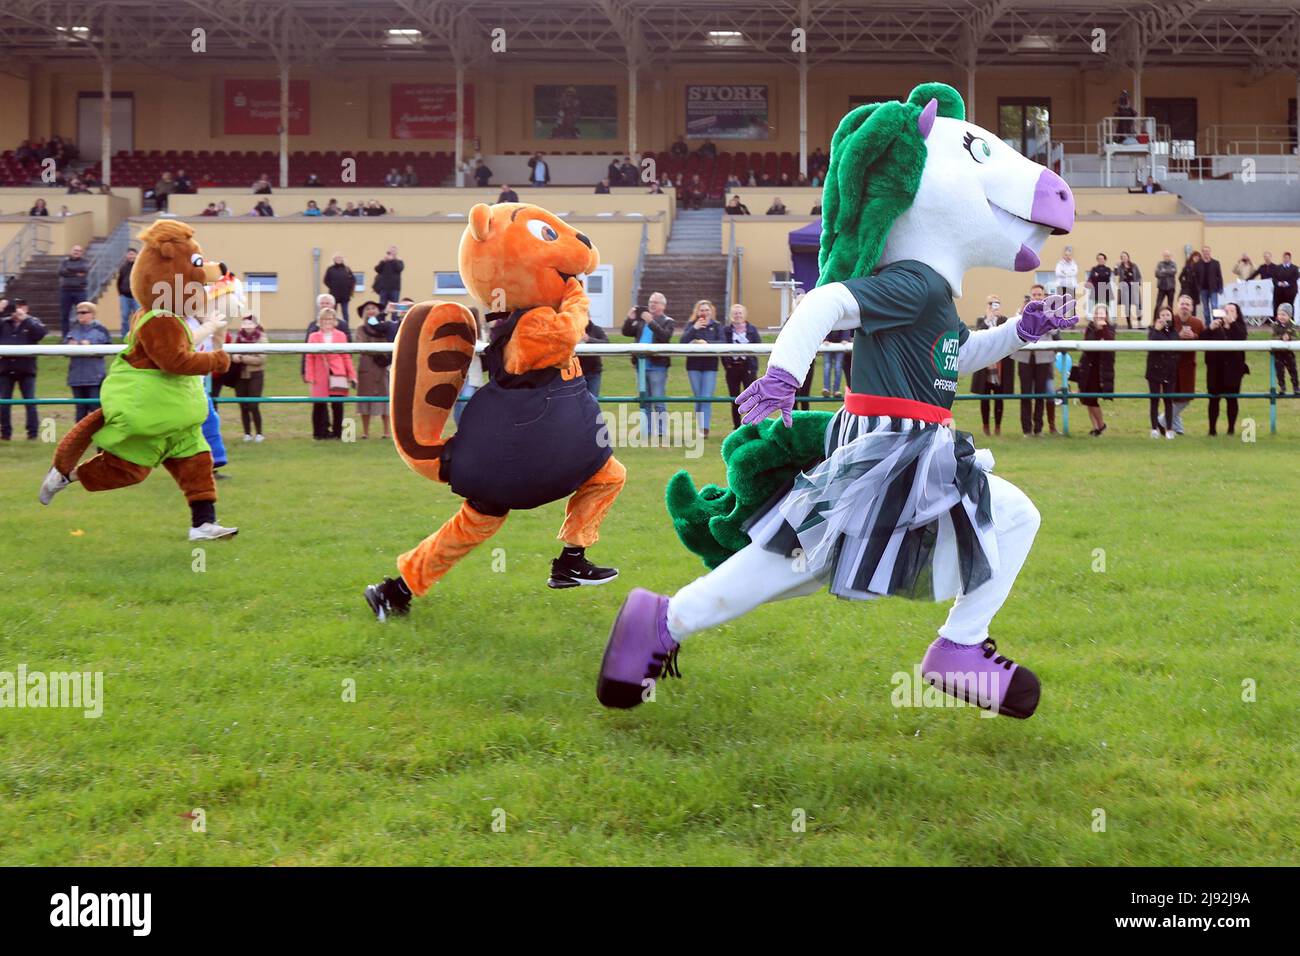 16.10.2021, Magdeburg, Saxony-Anhalt, Germany - Mascot race at the racecourse. 00S211016D618CAROEX.JPG [MODEL RELEASE: NO, PROPERTY RELEASE: NO (c) ca Stock Photo